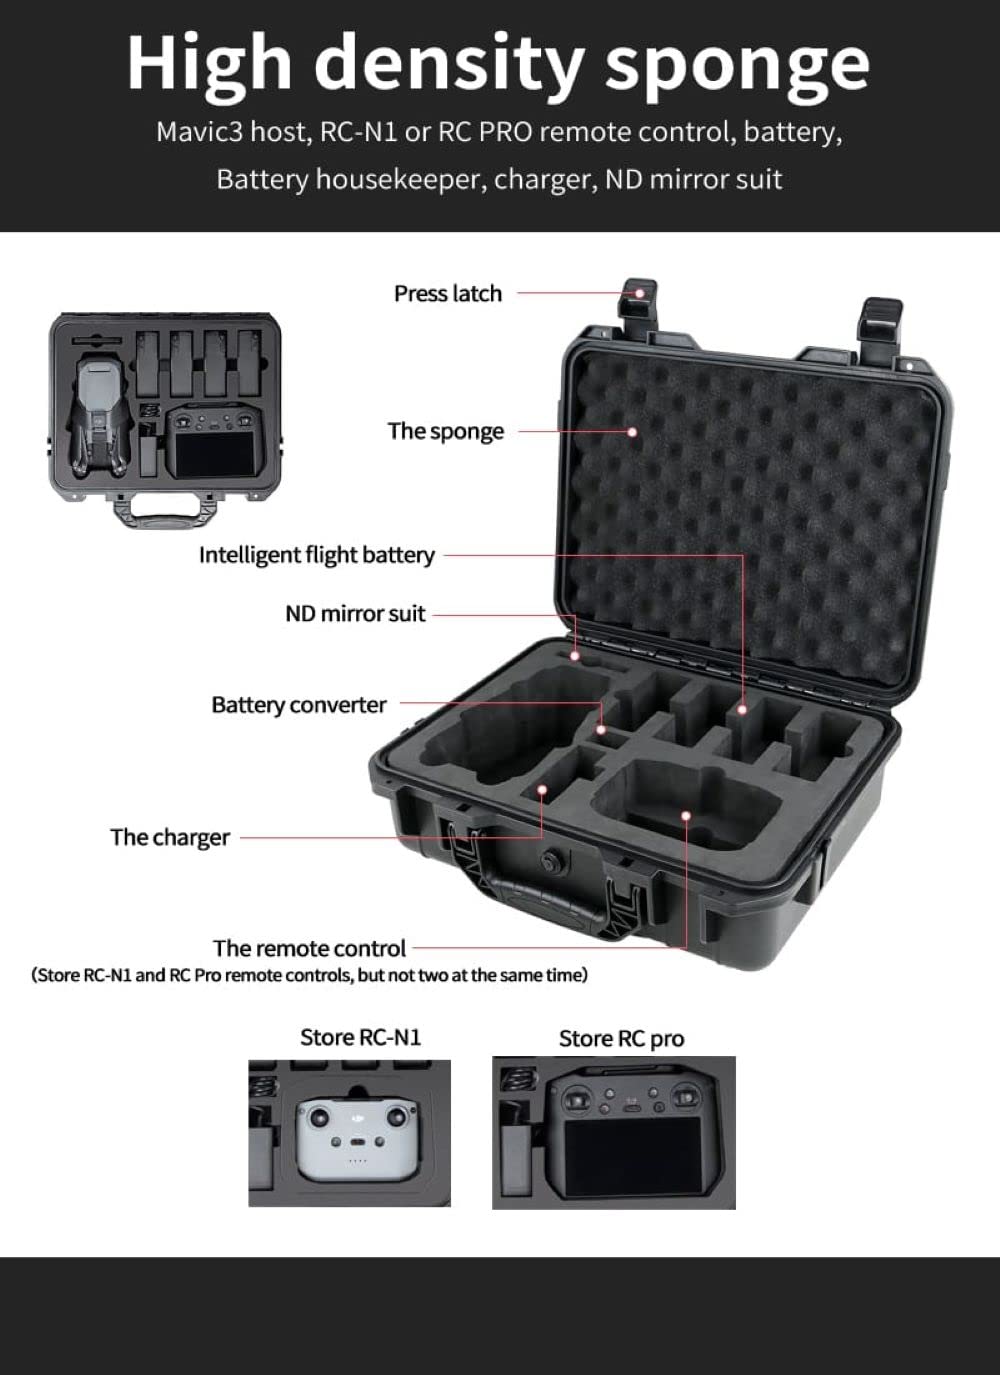 Carrying Case Bag for DJI Mavic 3 Pro and Cine Super Hard Shell Waterproof Protective Suitcases for Mavic 3, Smart Rc Pro, N1RC & Accessories